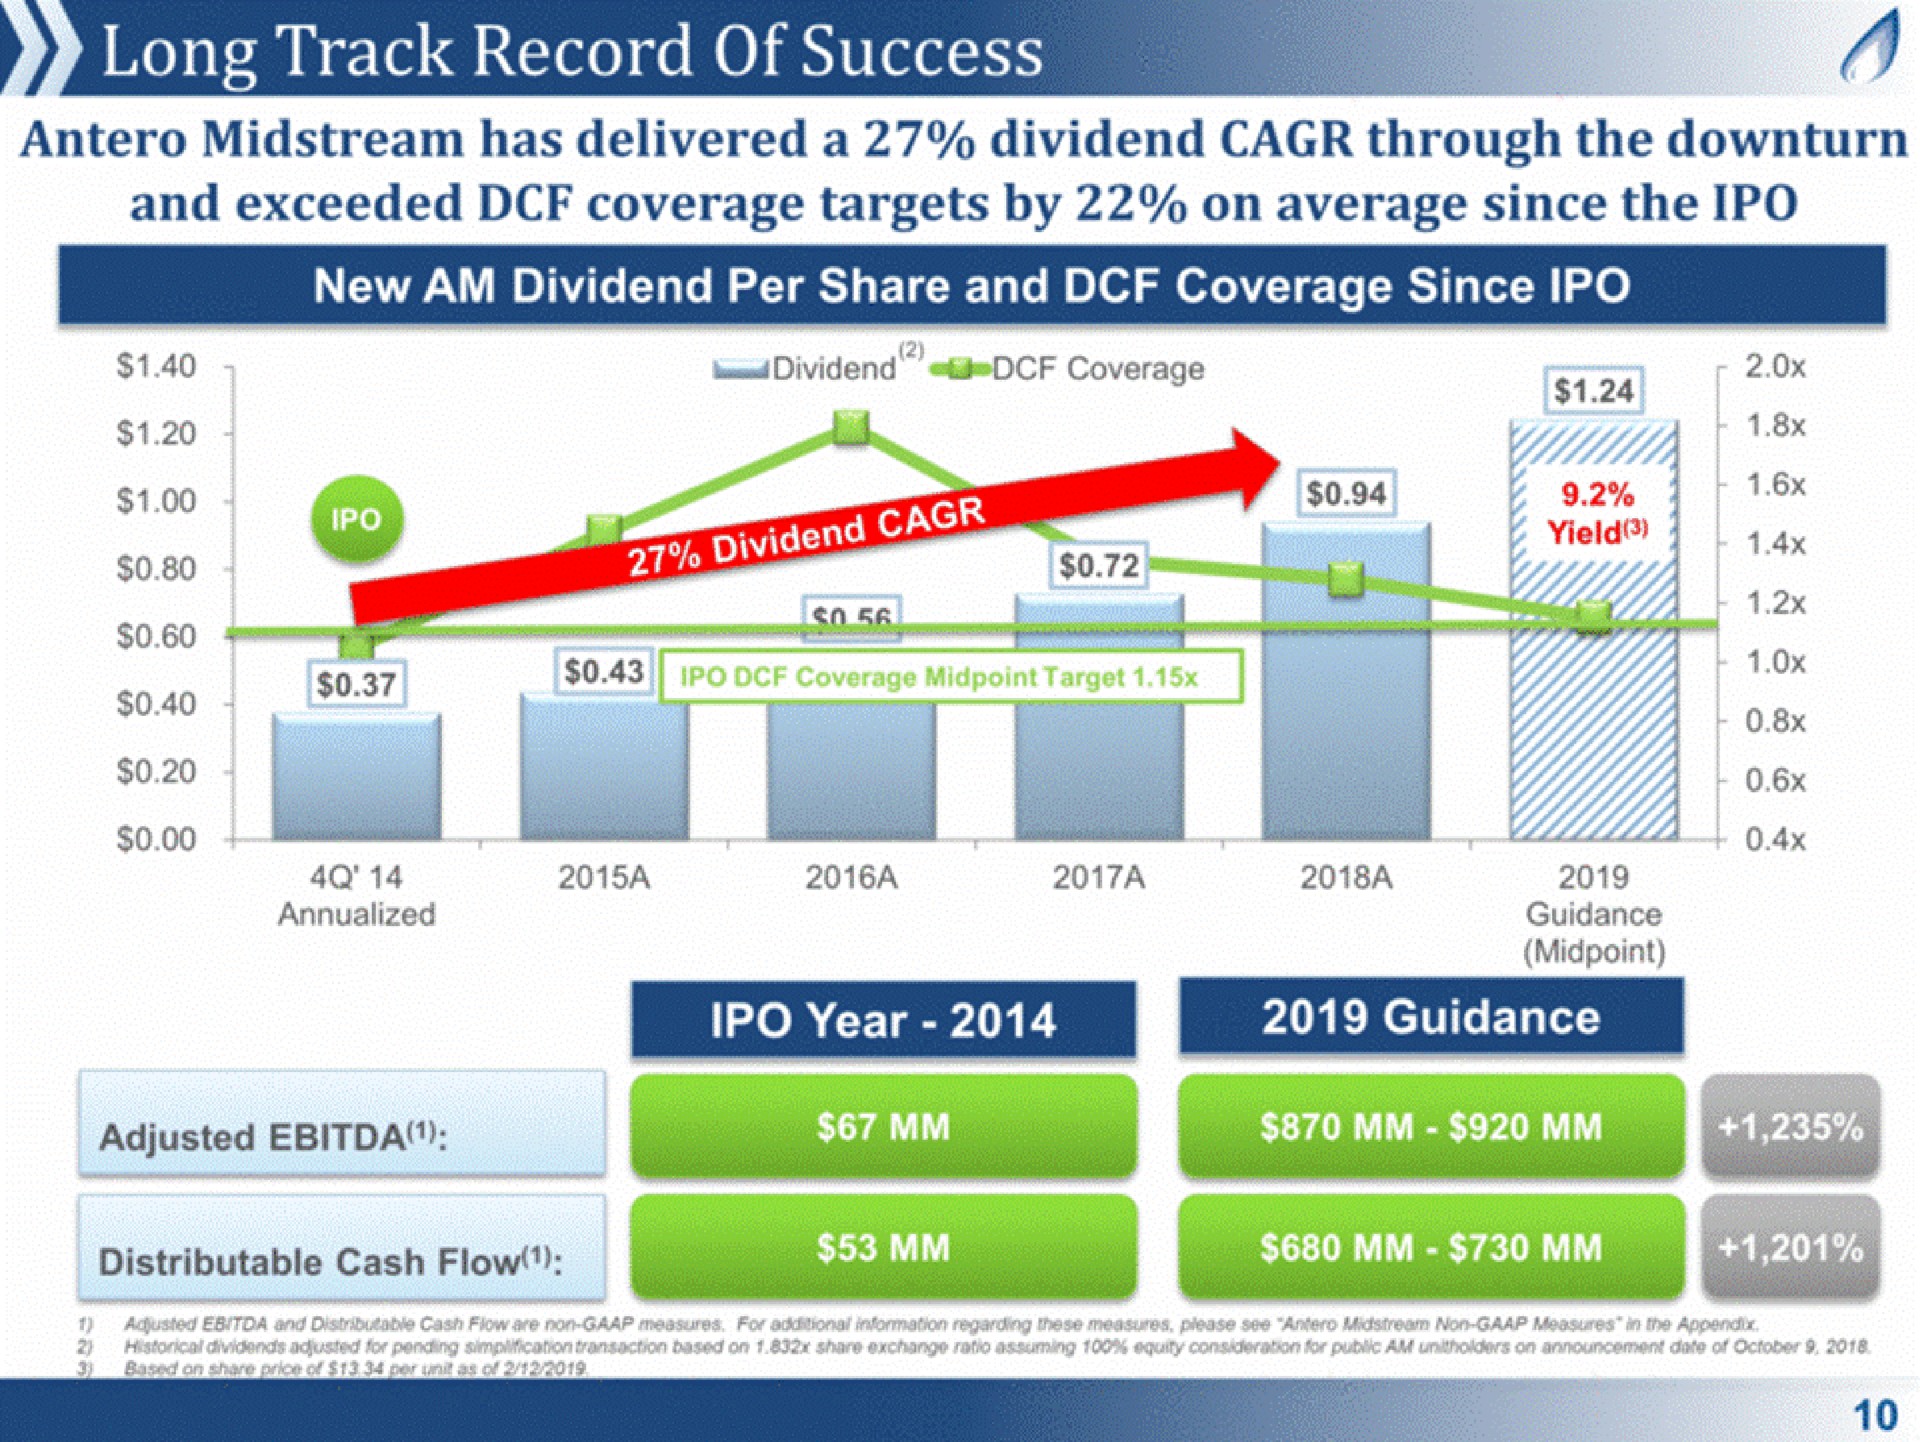 long track record of success guidance | Antero Midstream Partners